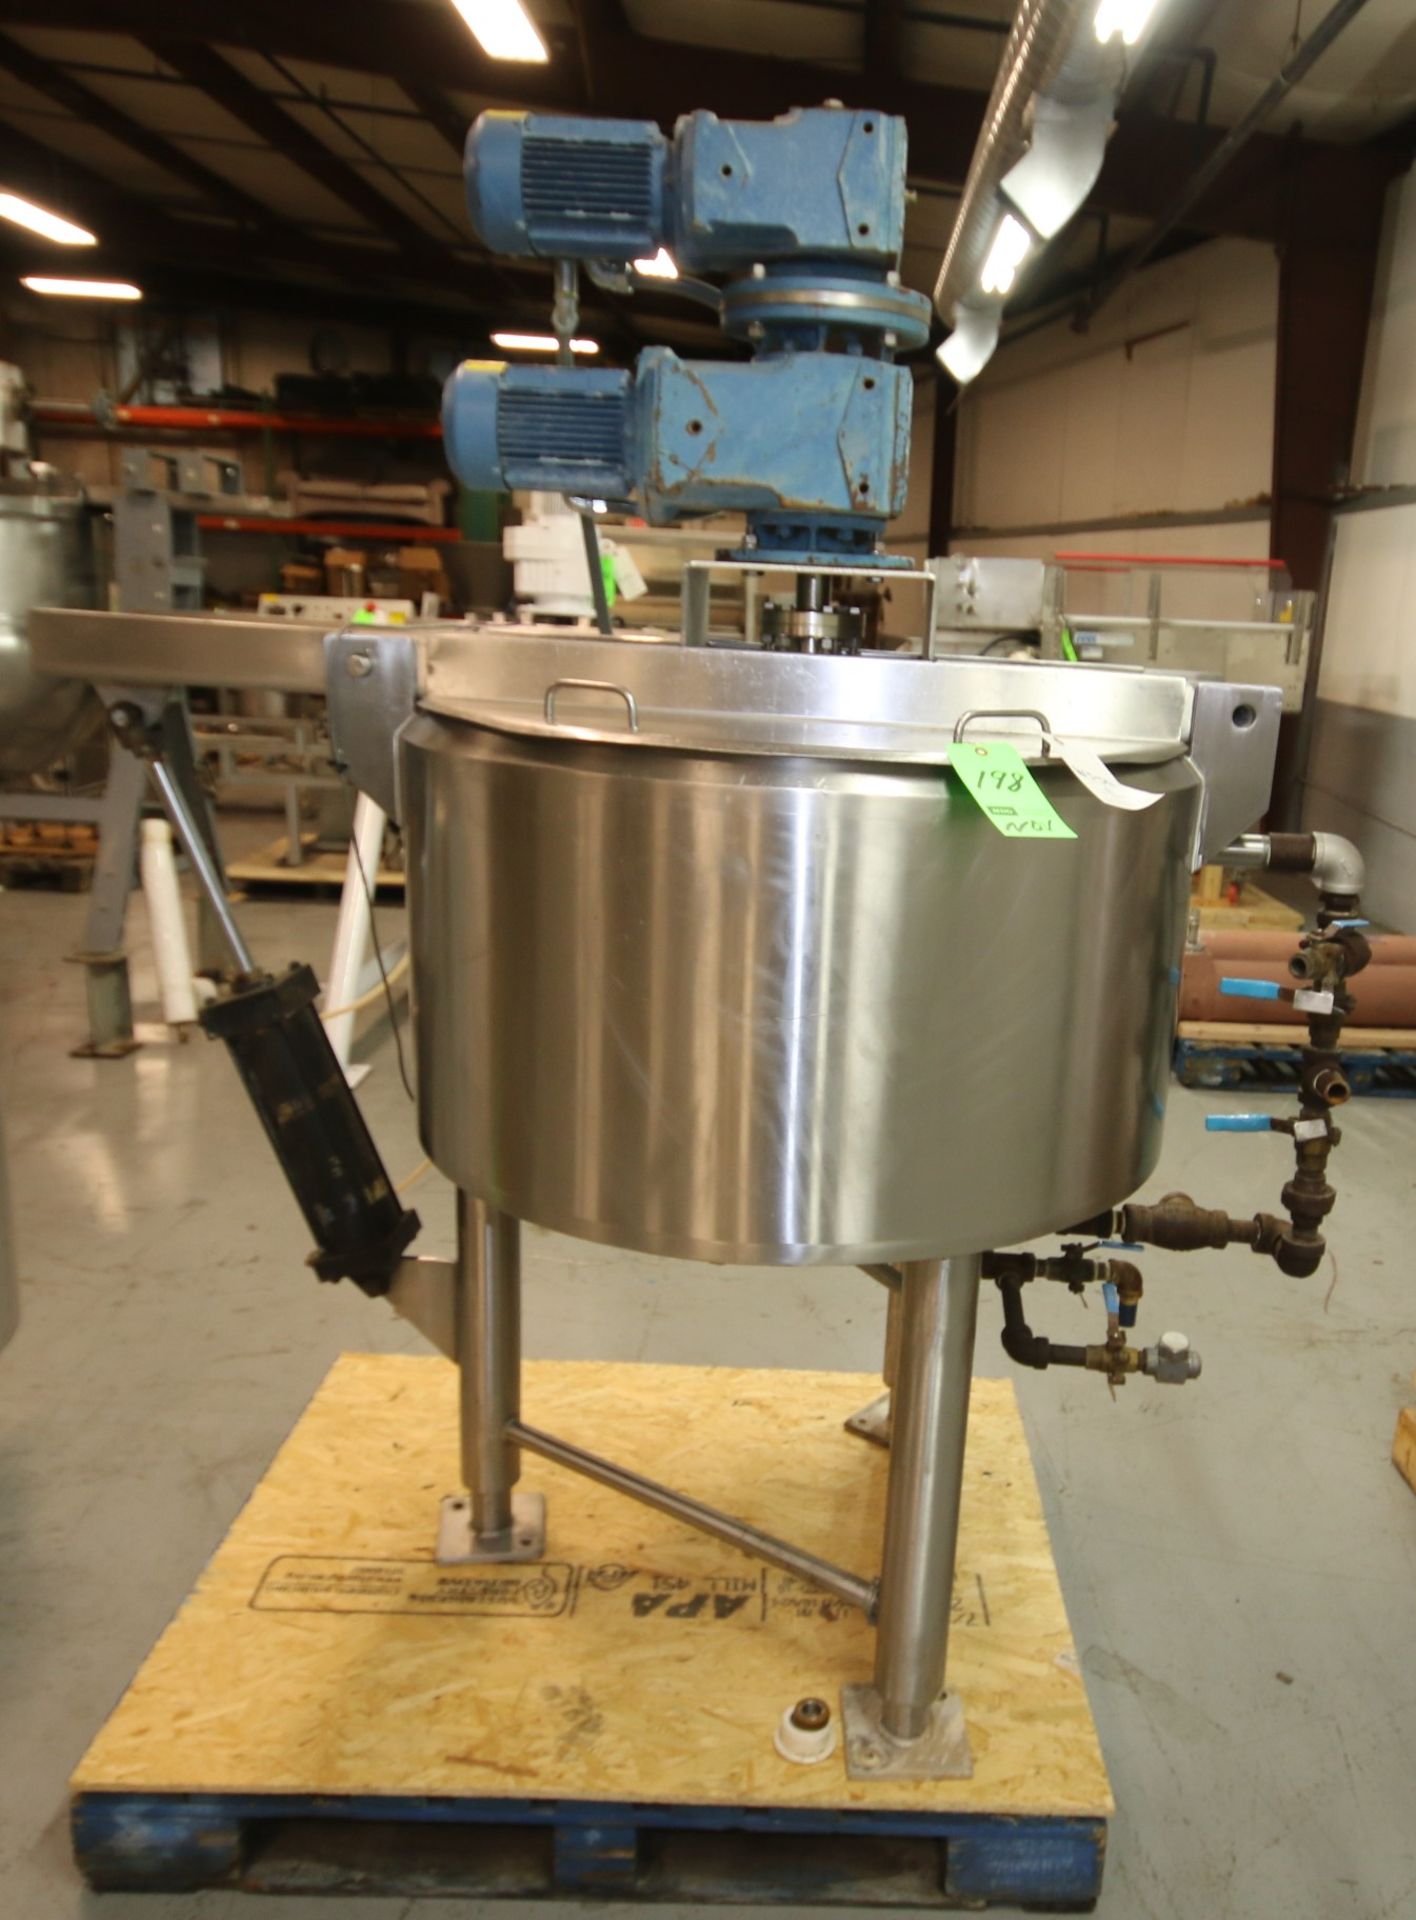 Cherry Burrel Aprox. 75 Gal Hinged Lid S/S Processor / Kettle, SN E-458-90, with Dual Motion